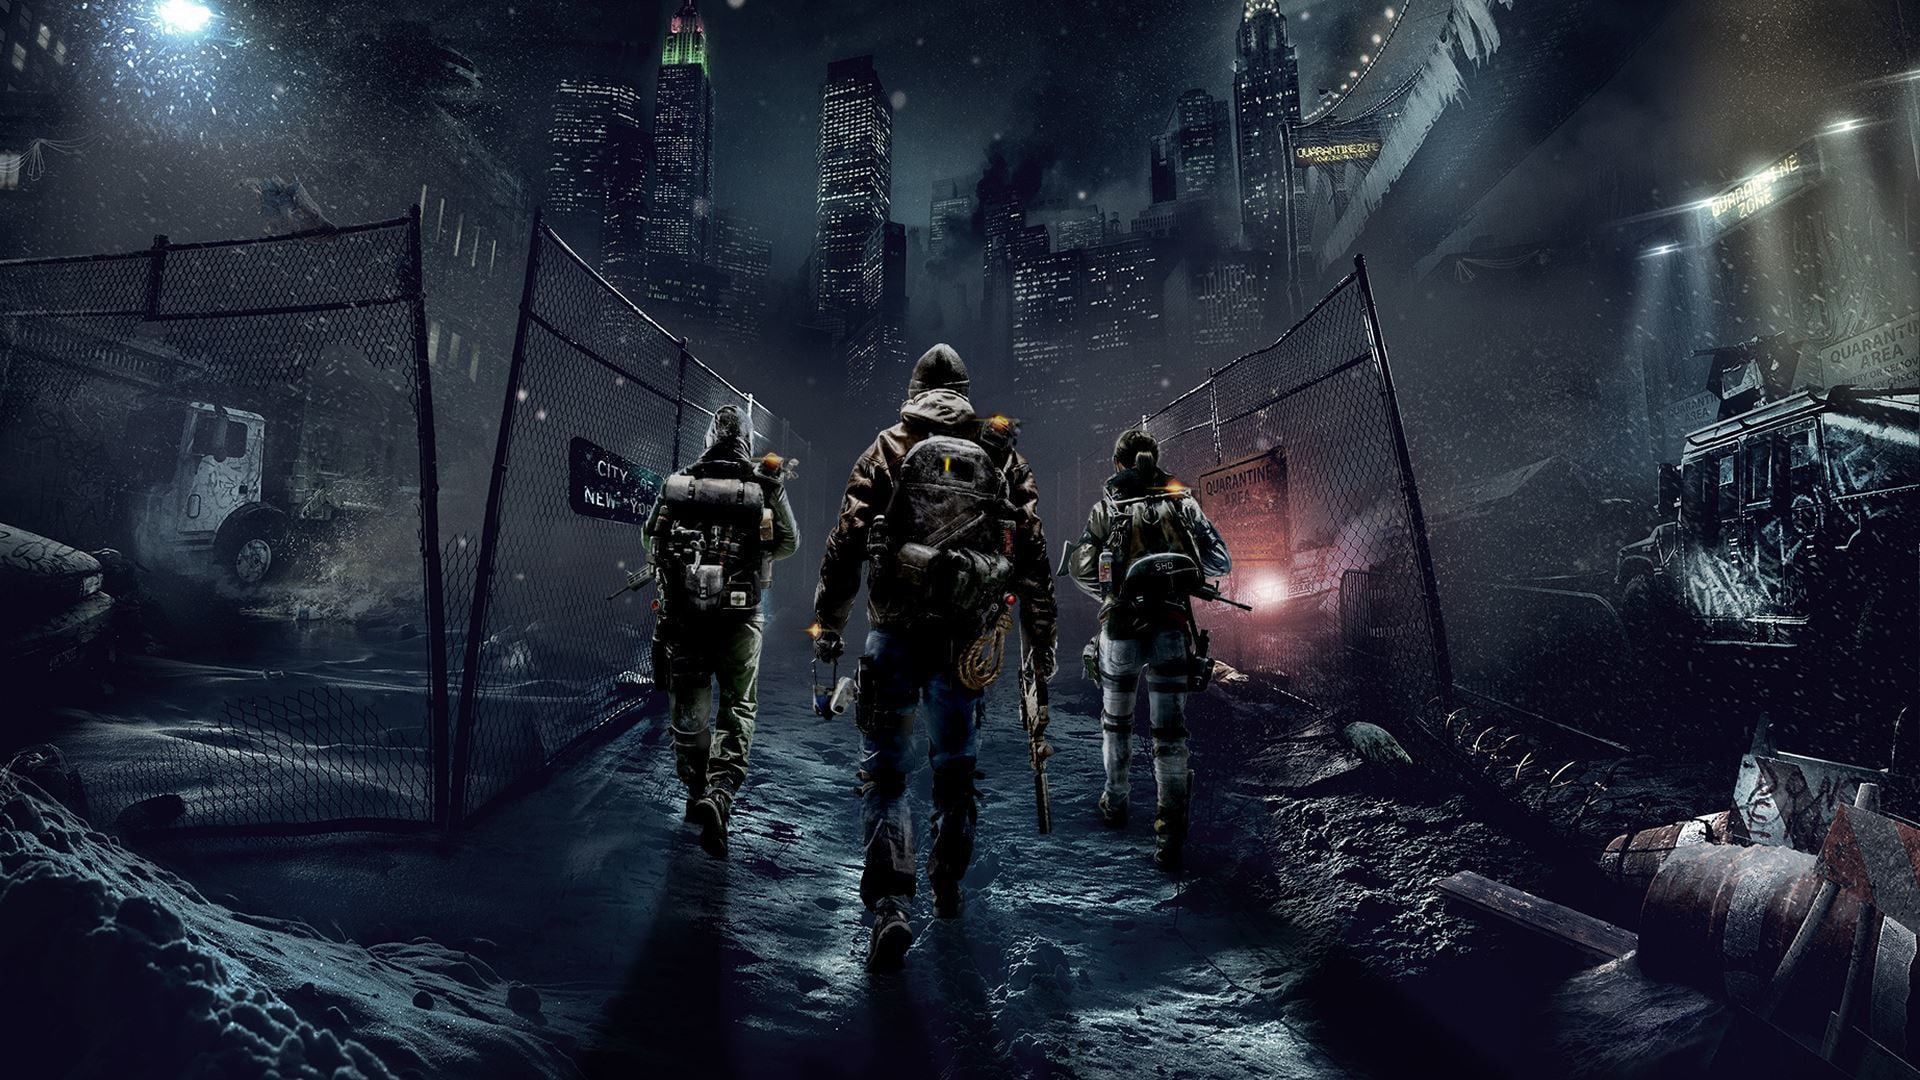 Tom Clancy's The Division, Ubisoft Entertainment, New York, Night